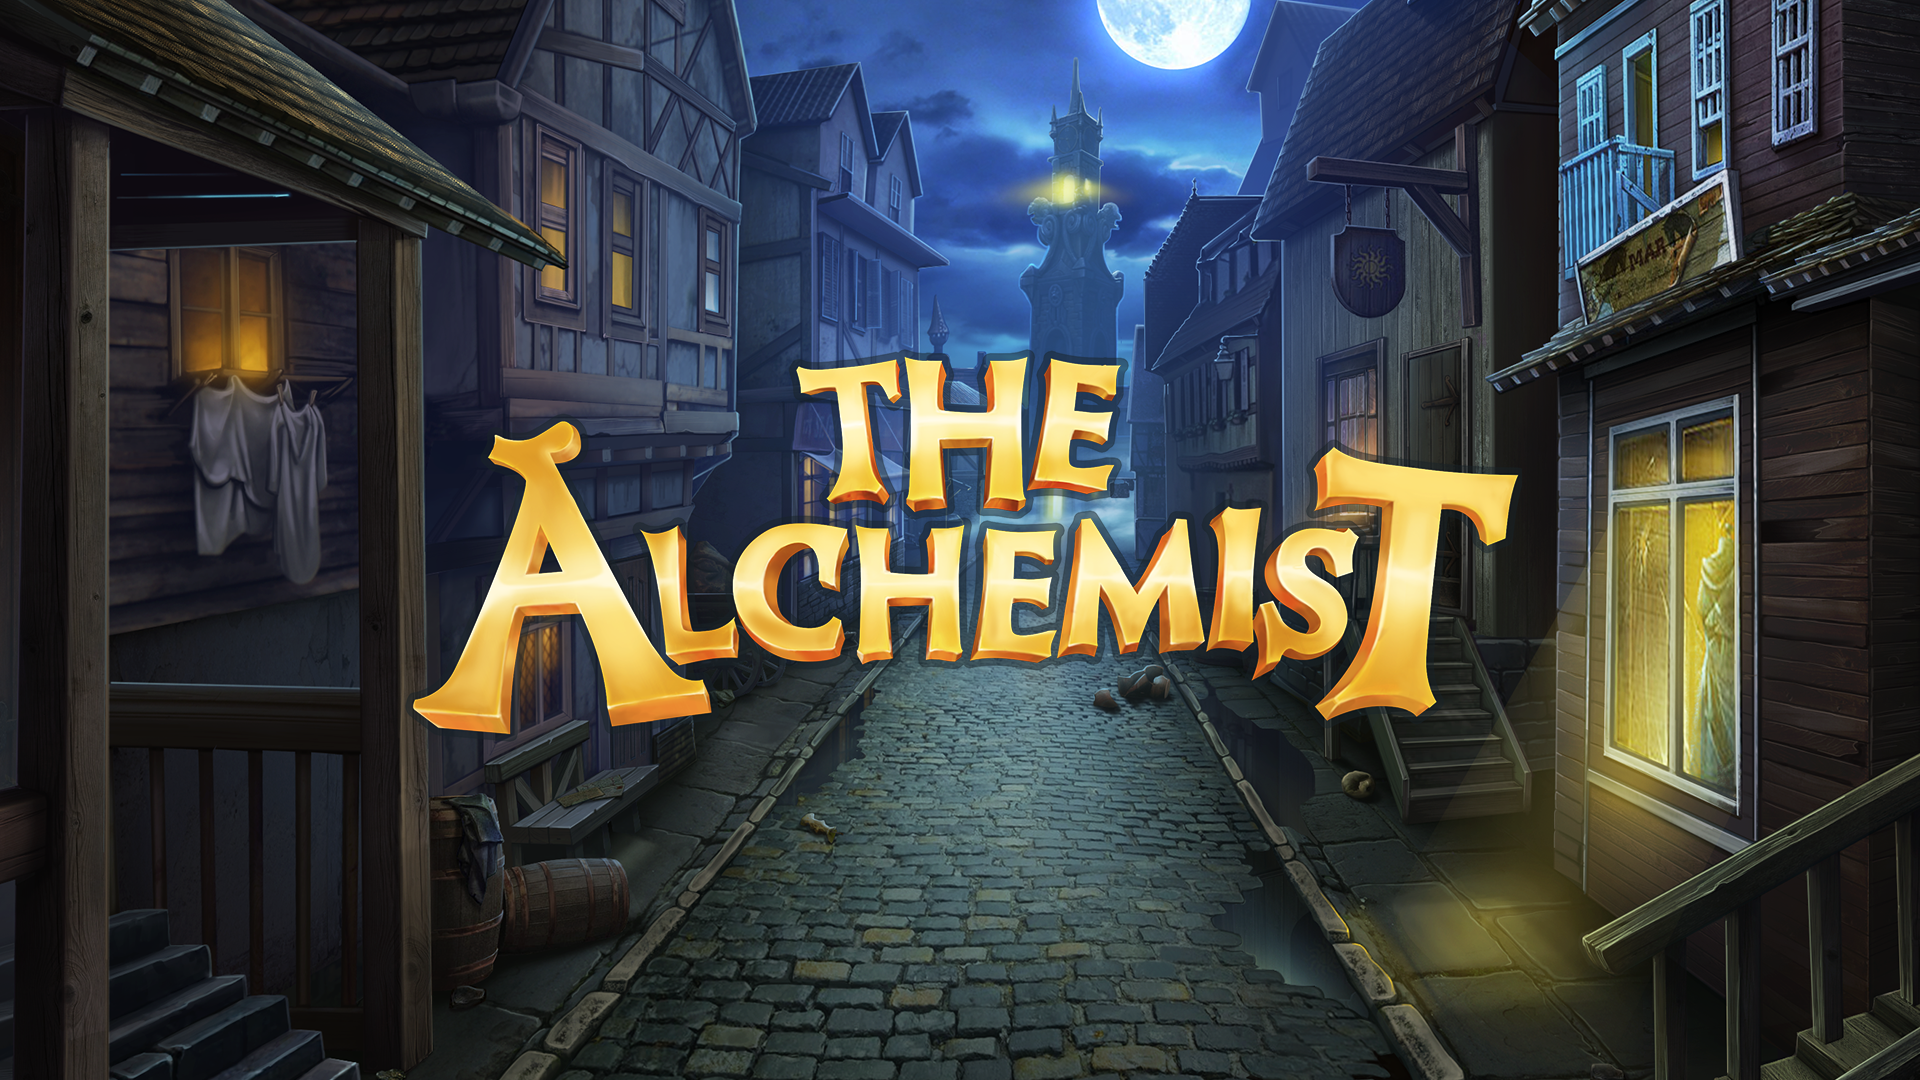 The Alchemist: Mystery Match Three in a Row Gamesのキャプチャ